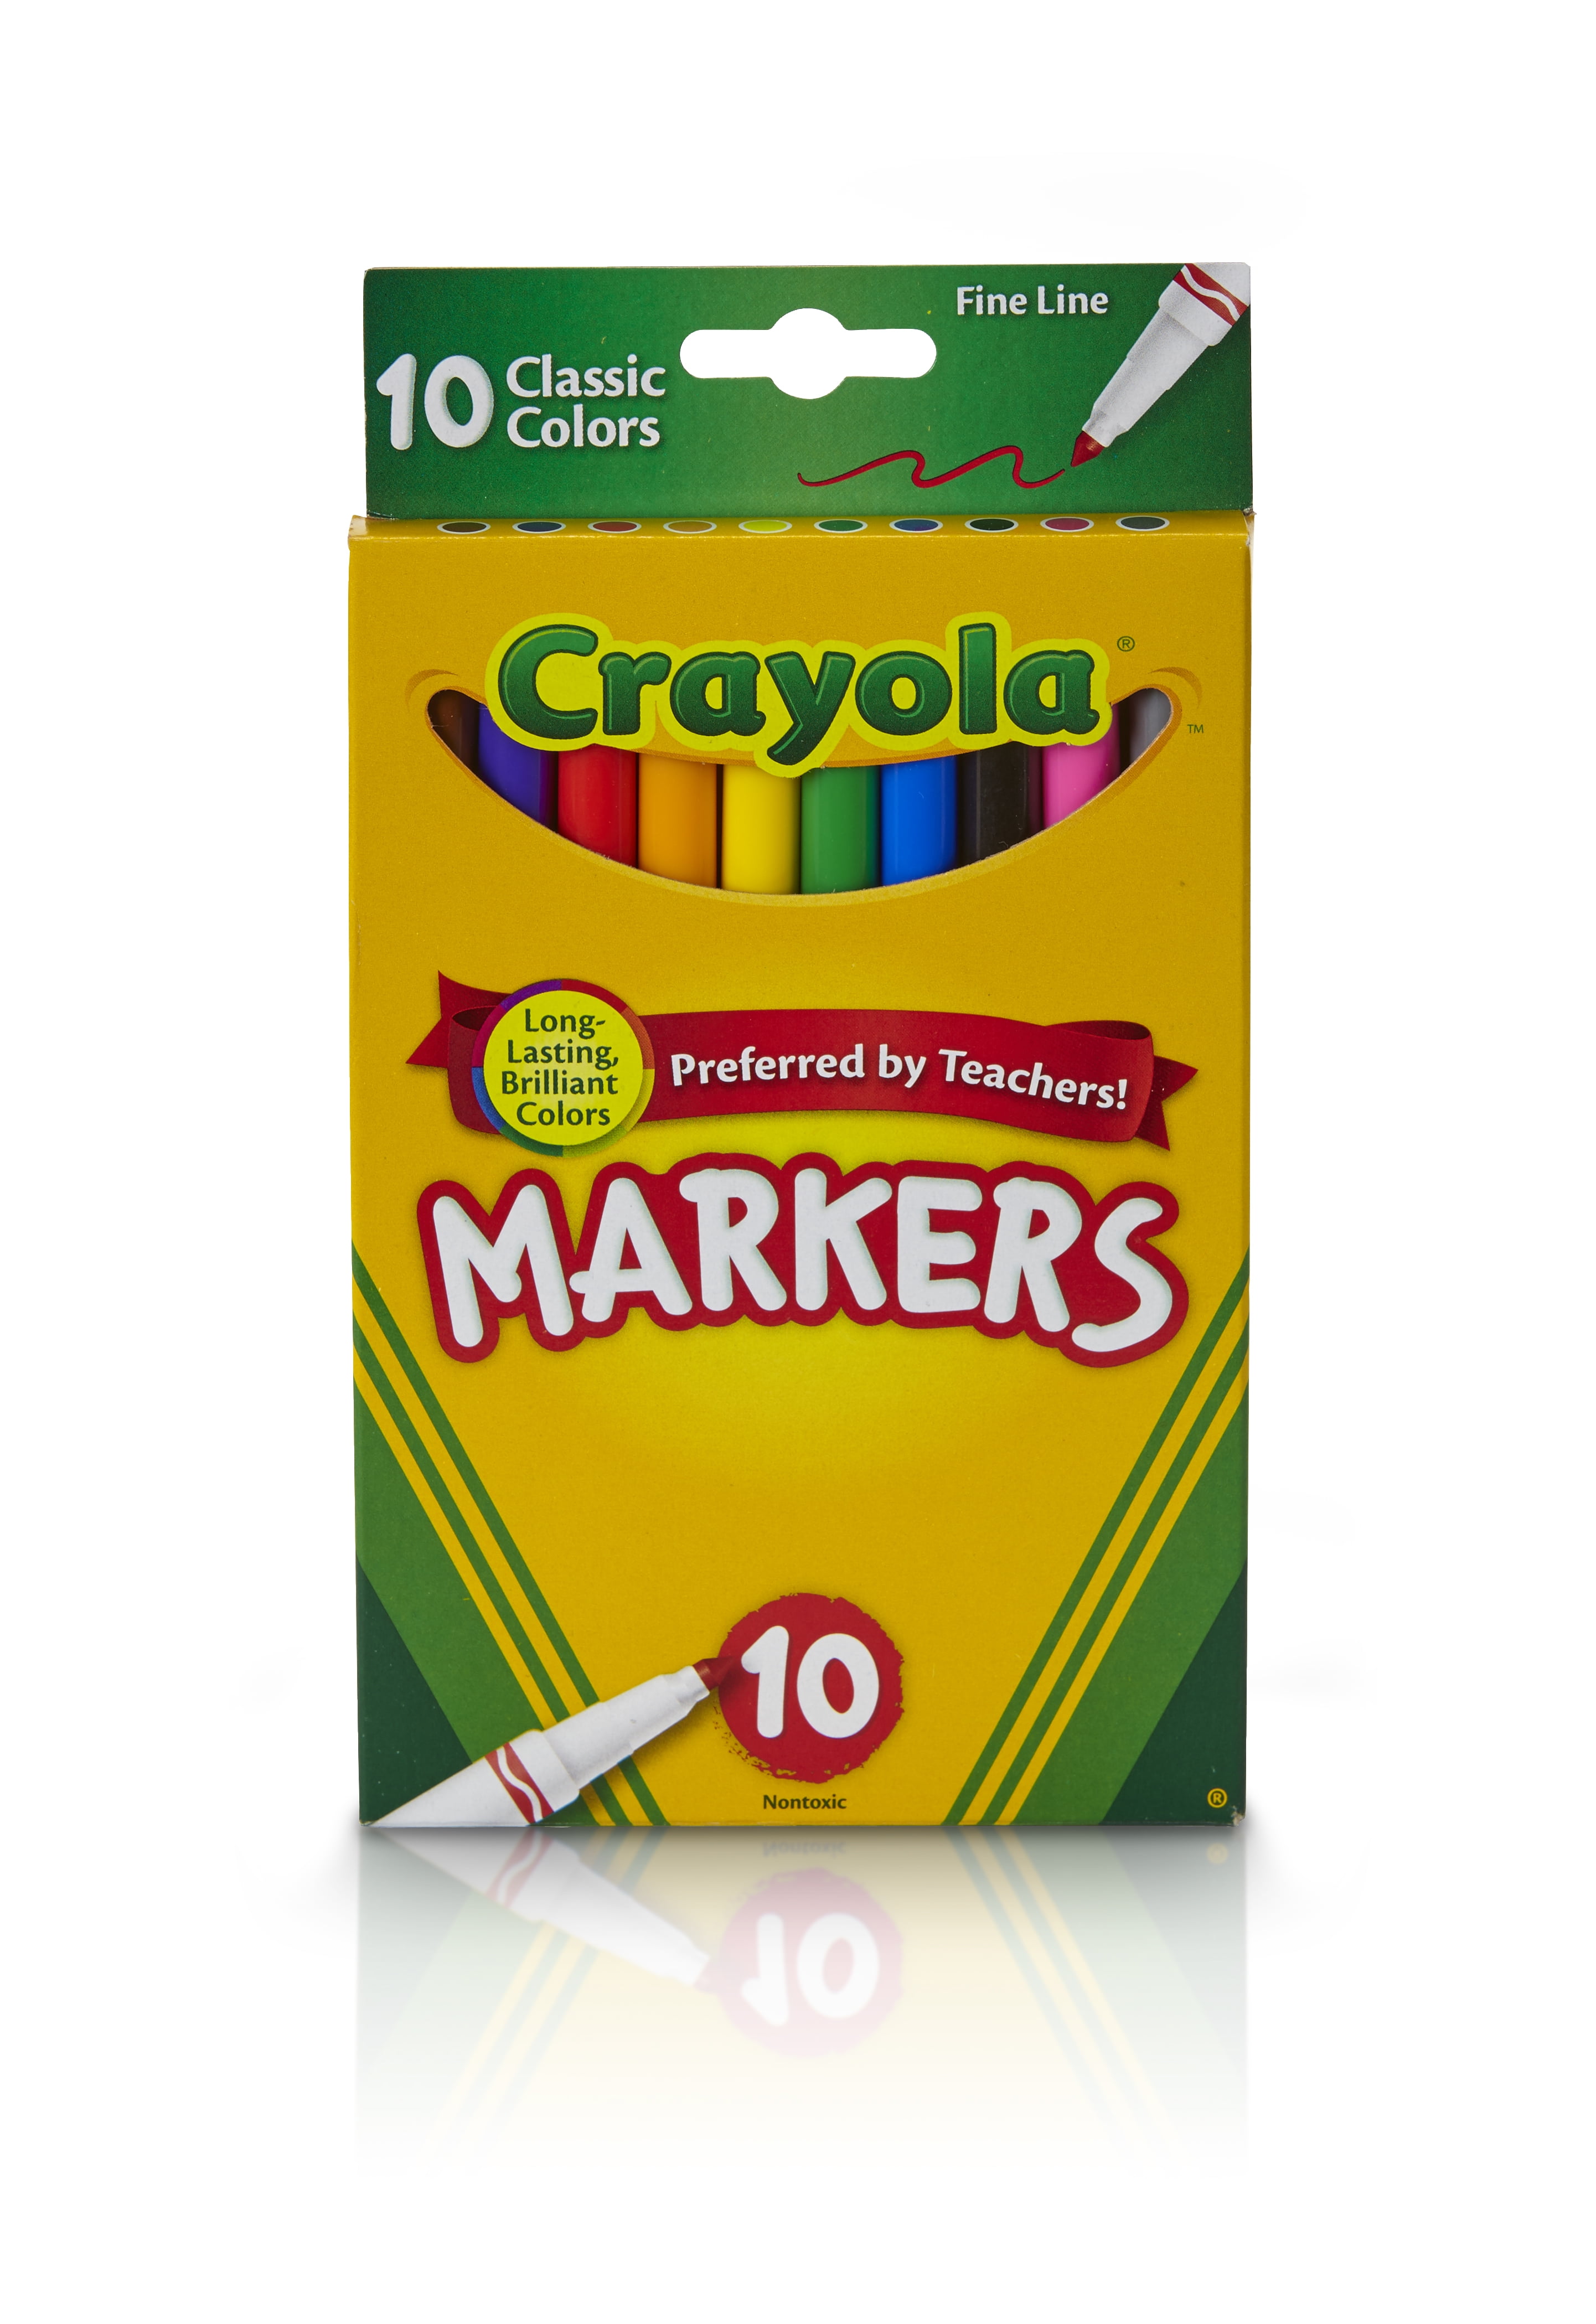 Crayola 10 Pack Markers & 24 Count Box of Crayons Art School Supplies